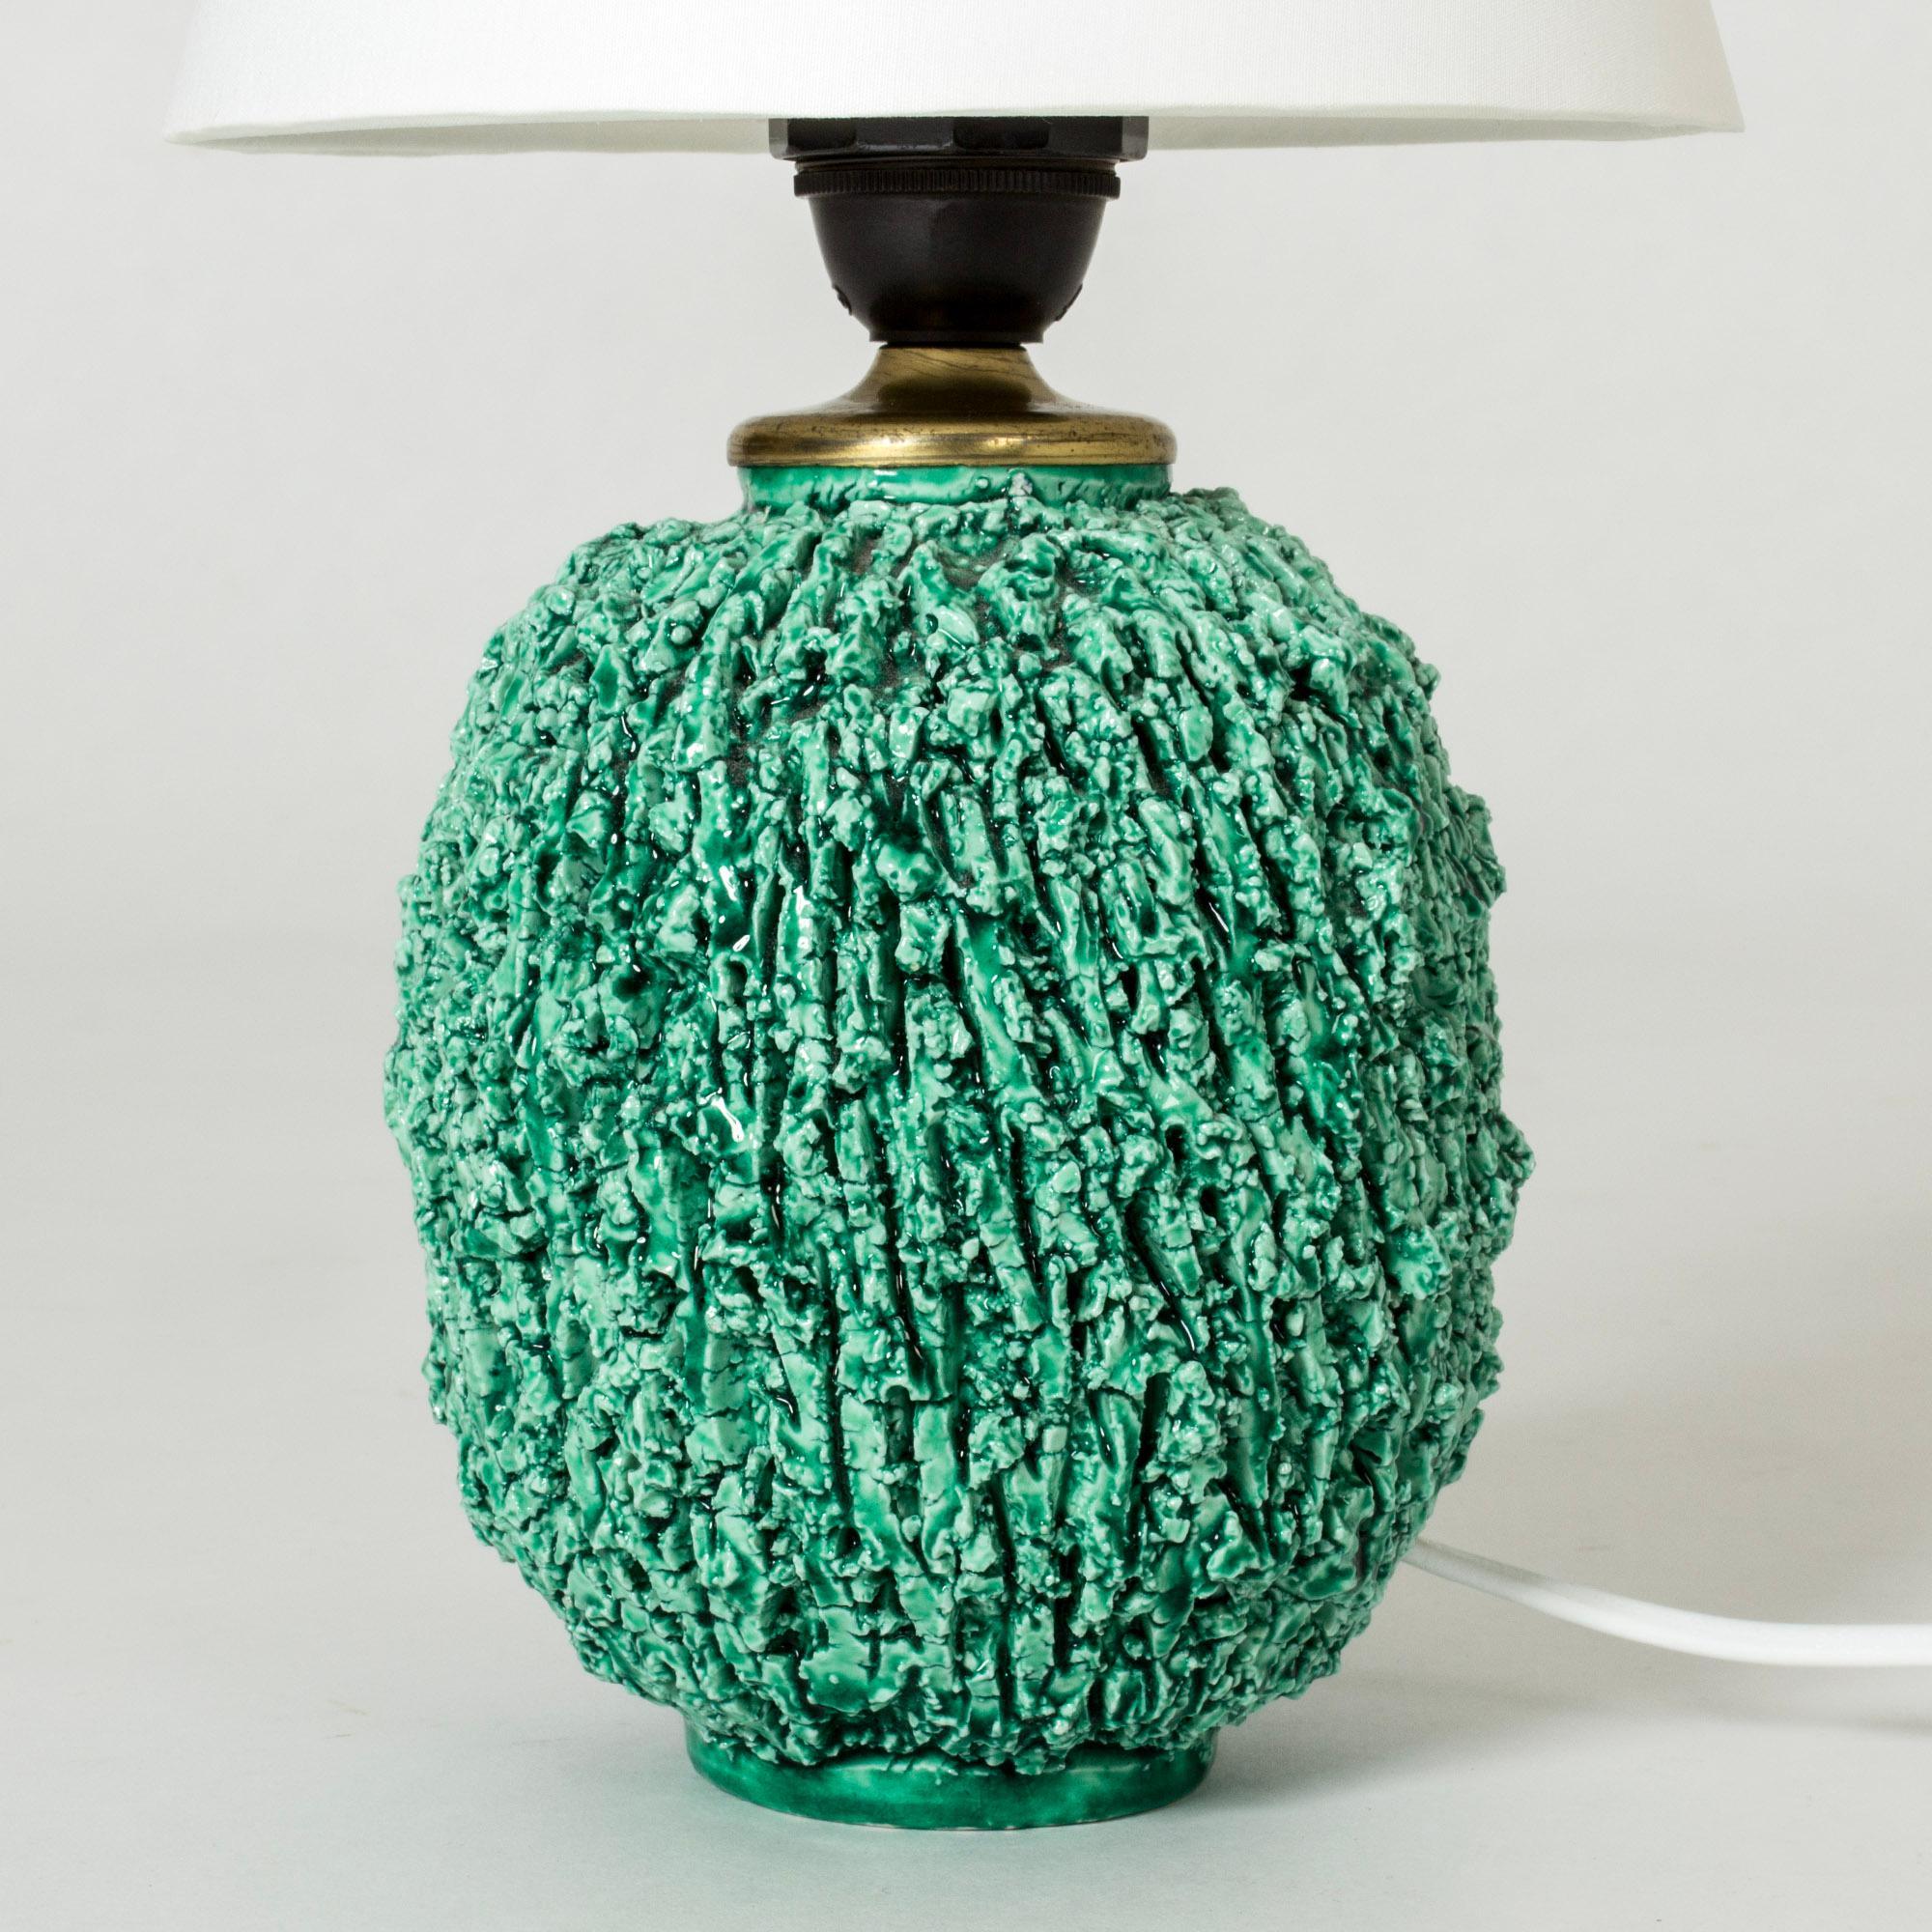 Striking table lamp by Gunnar Nylund, made in chamotte stoneware in Nylund’s “Hedgehog” model. The clean form contrasts with the craggy surface. Vibrant green glaze.

The model was introduced around 1937 and became a great success. It was made with